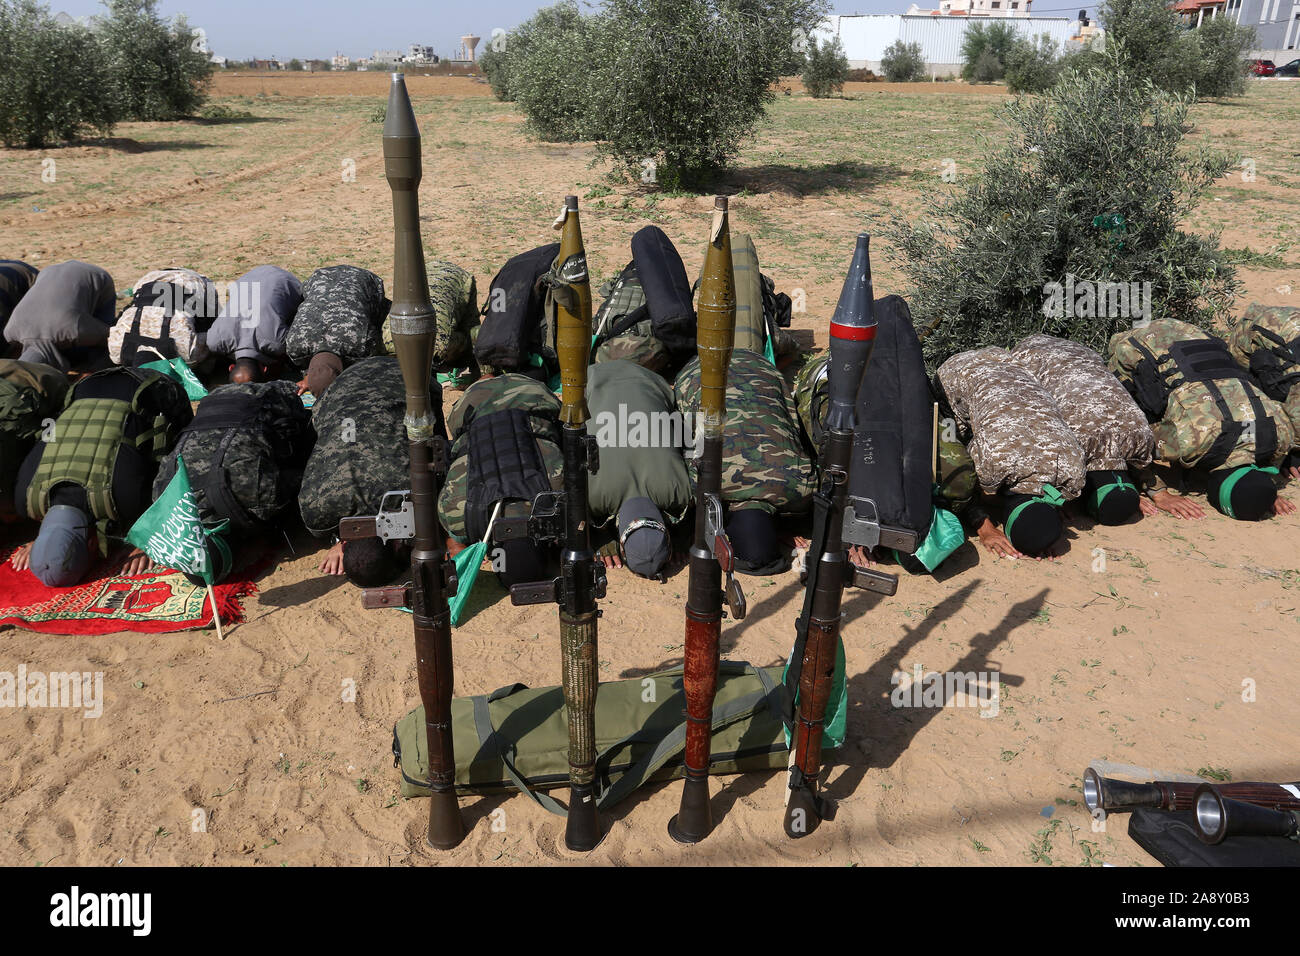 Palestinian Hamas militants take part in an anti-Israel military show in the southern Gaza Strip on Nov 11, 2019. Photo by Abed Rahim Khatib/alamy Stock Photo